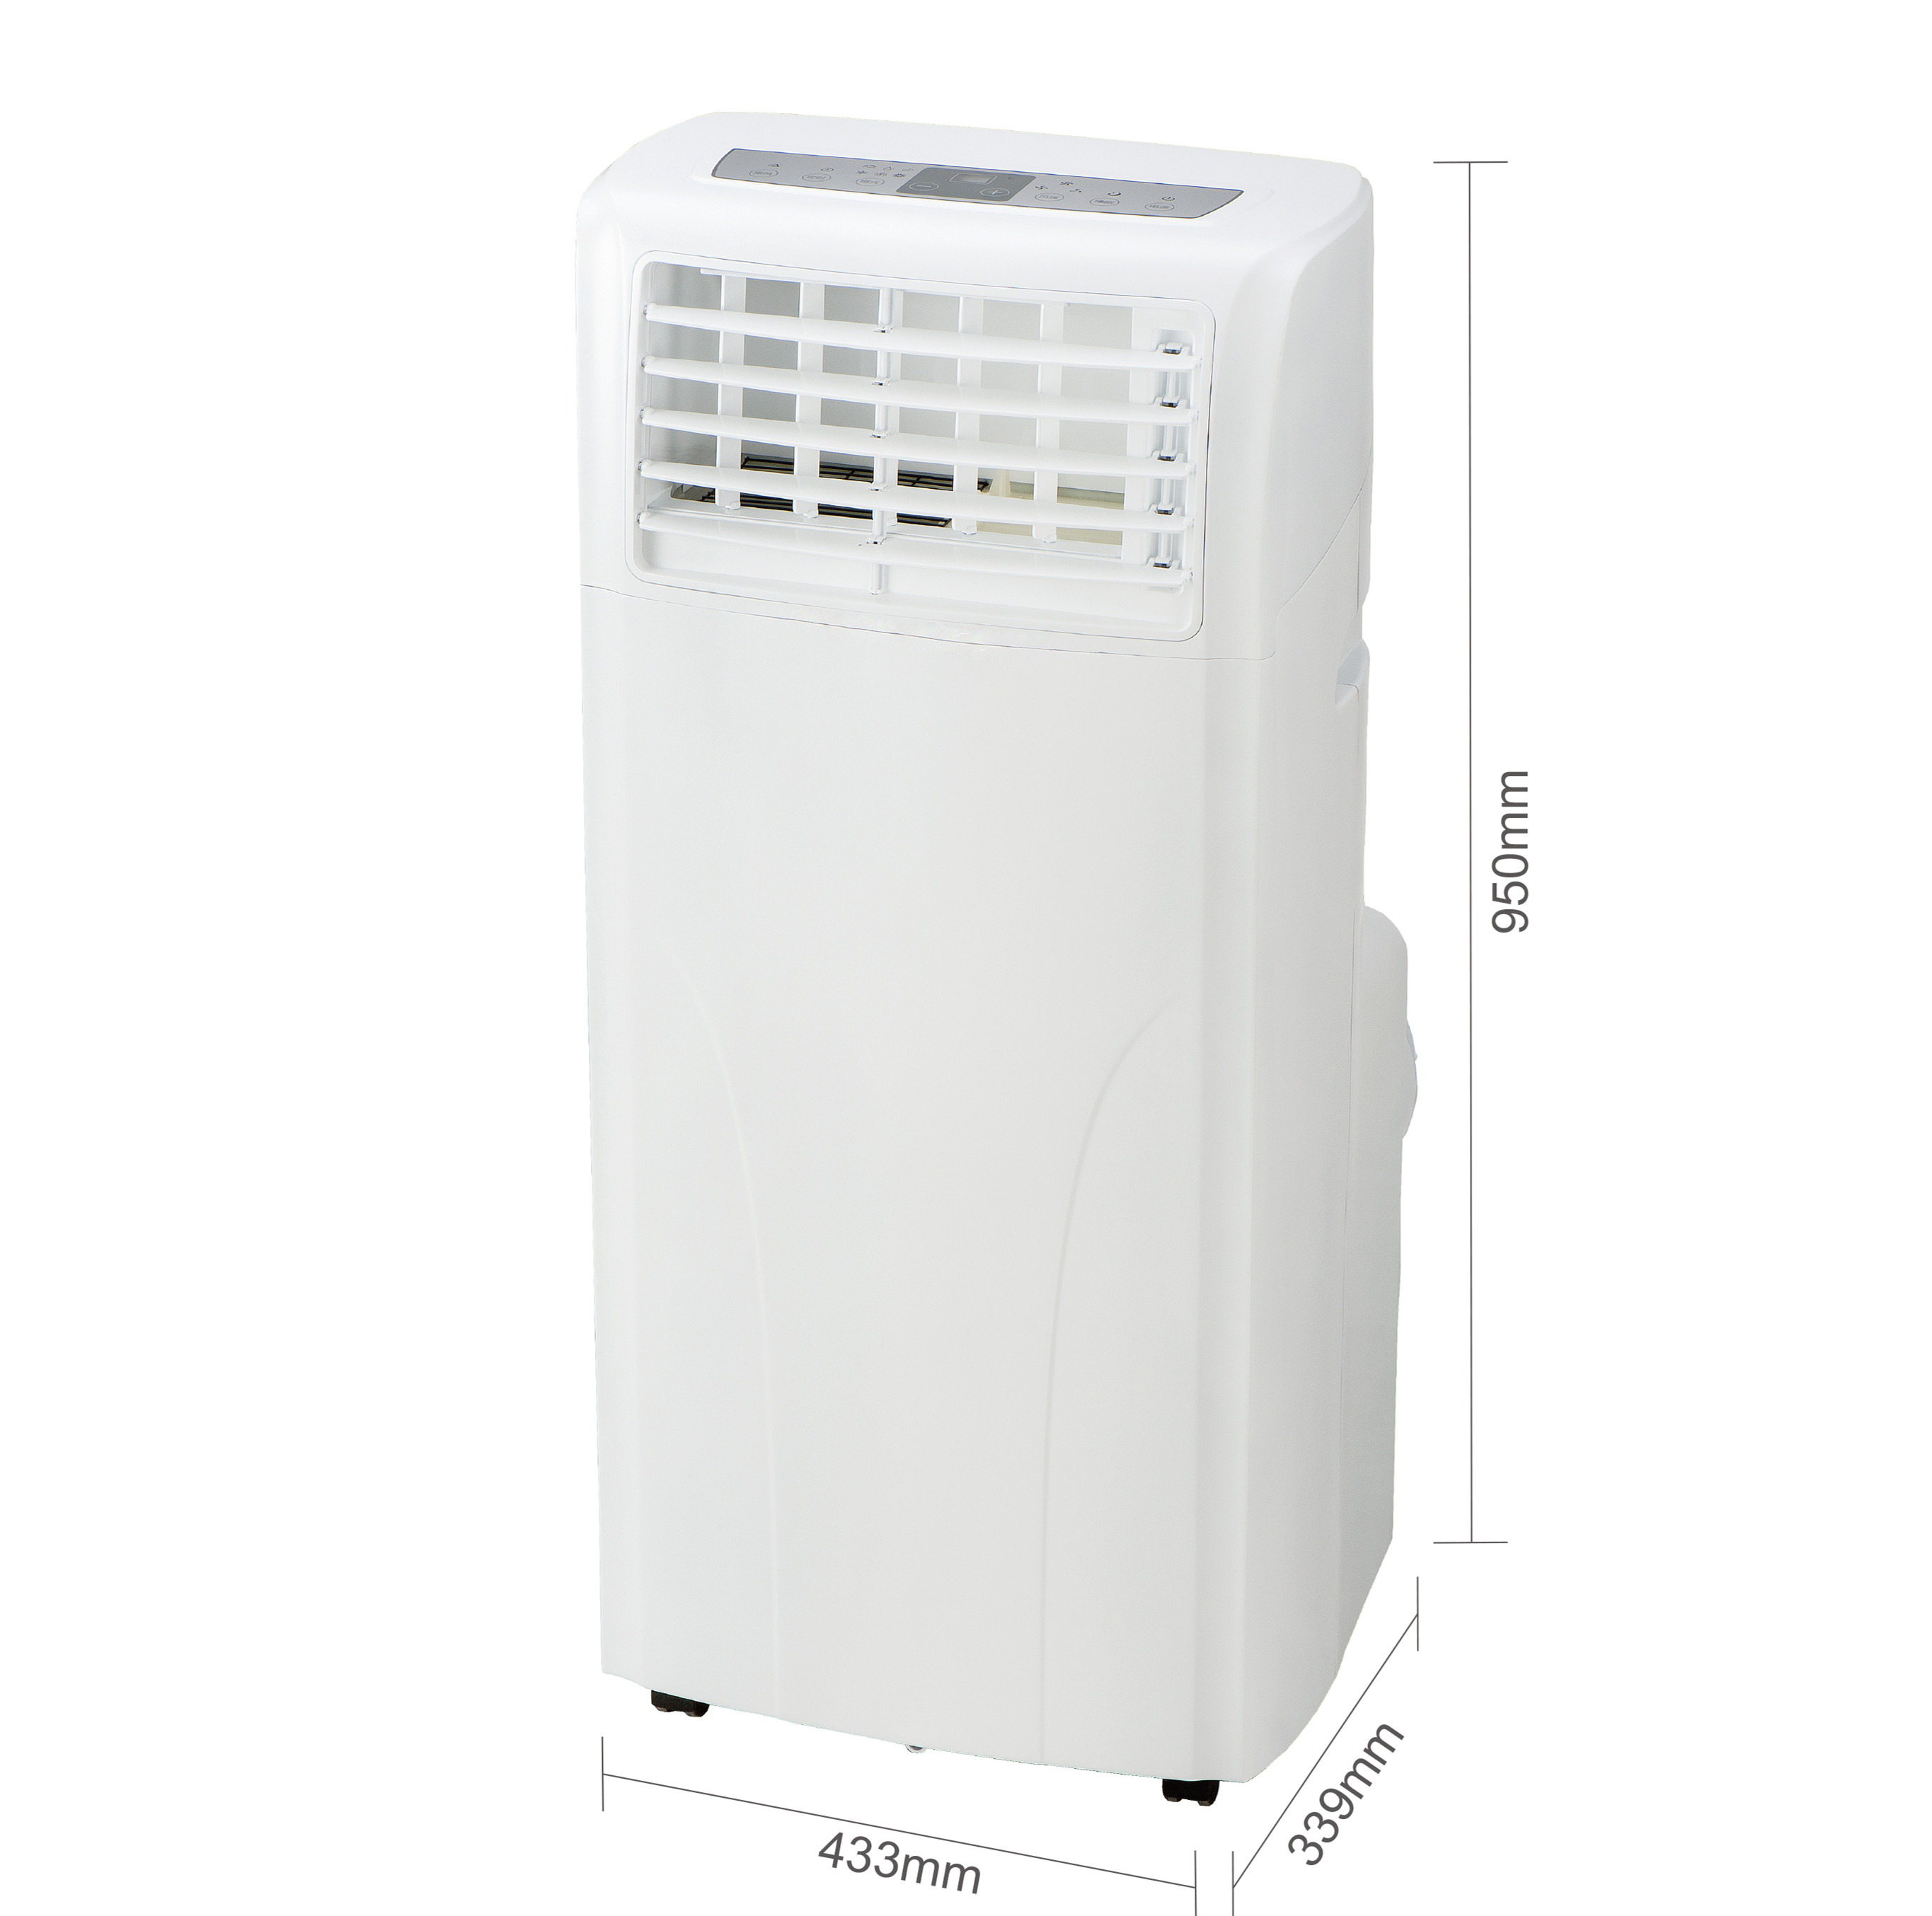 Ductless Active Portable Air Conditioner for A Garage